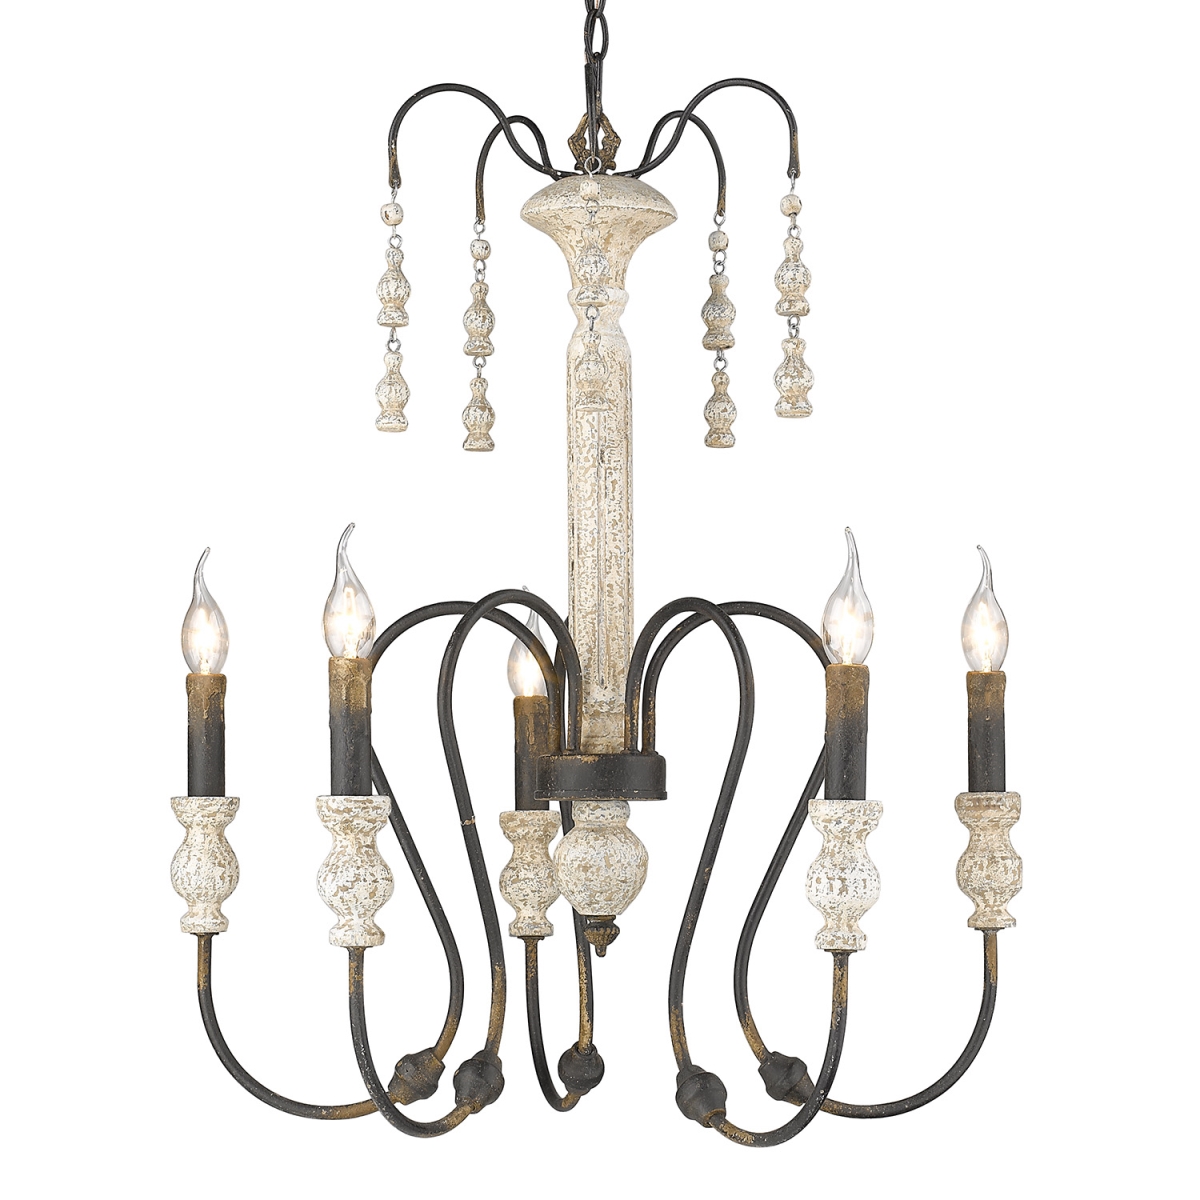 0875-5 Abi 23 In. Amelie 5 Lights Antique Black Iron Chandelier Ceiling Light - Weathered White Wood